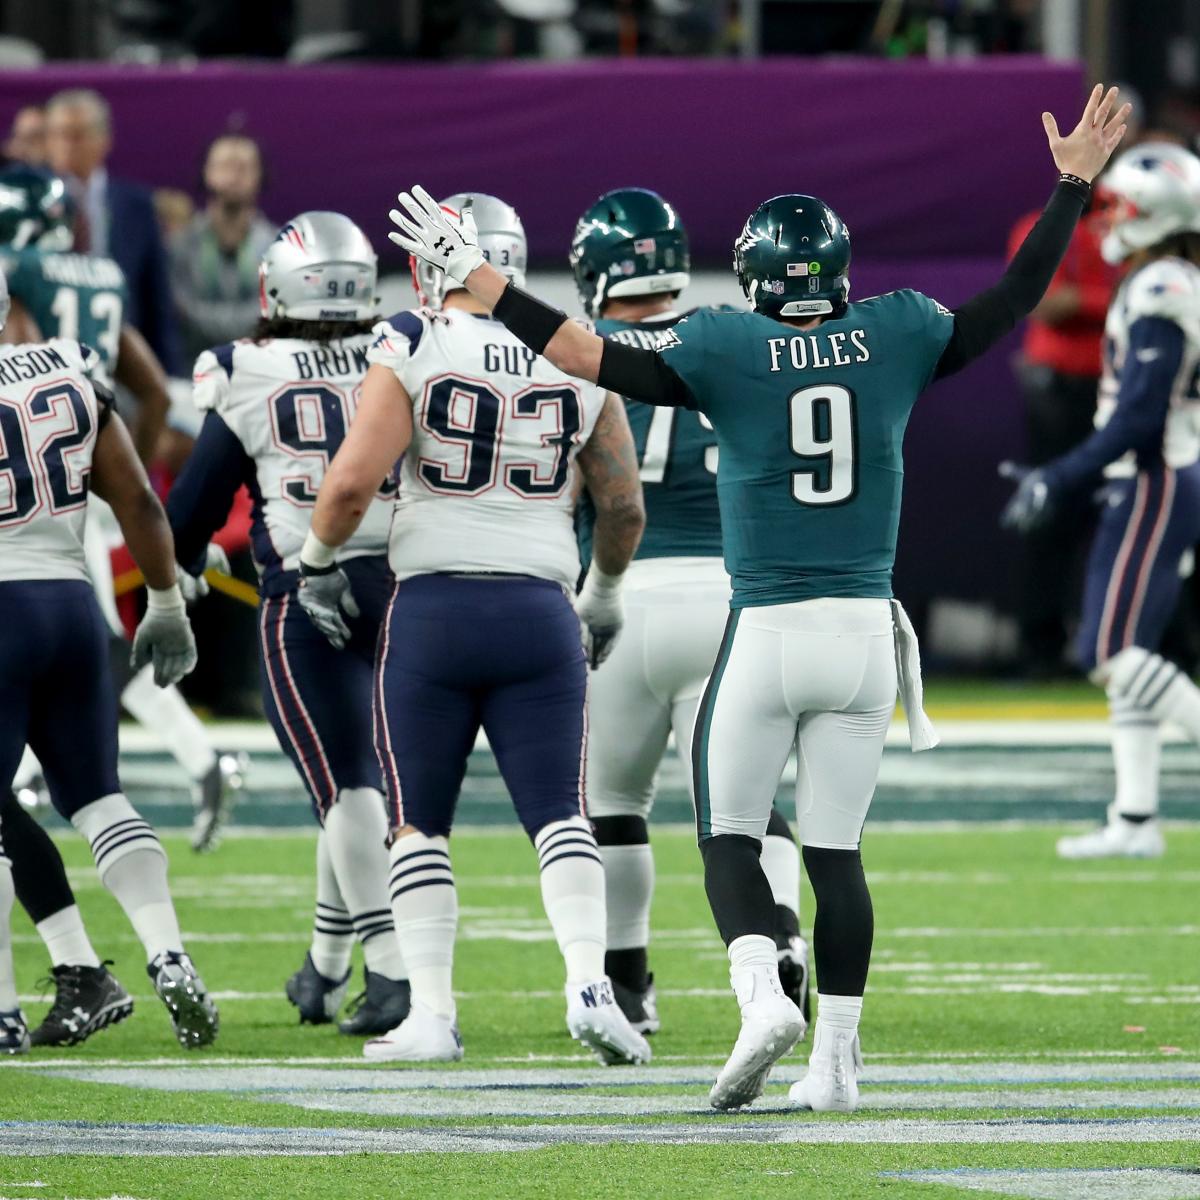 Did you hear? Tom Brady & defending Super Bowl champion Patriots meet Nick  Foles & Eagles in Super Bowl LII this Sunday on NBC